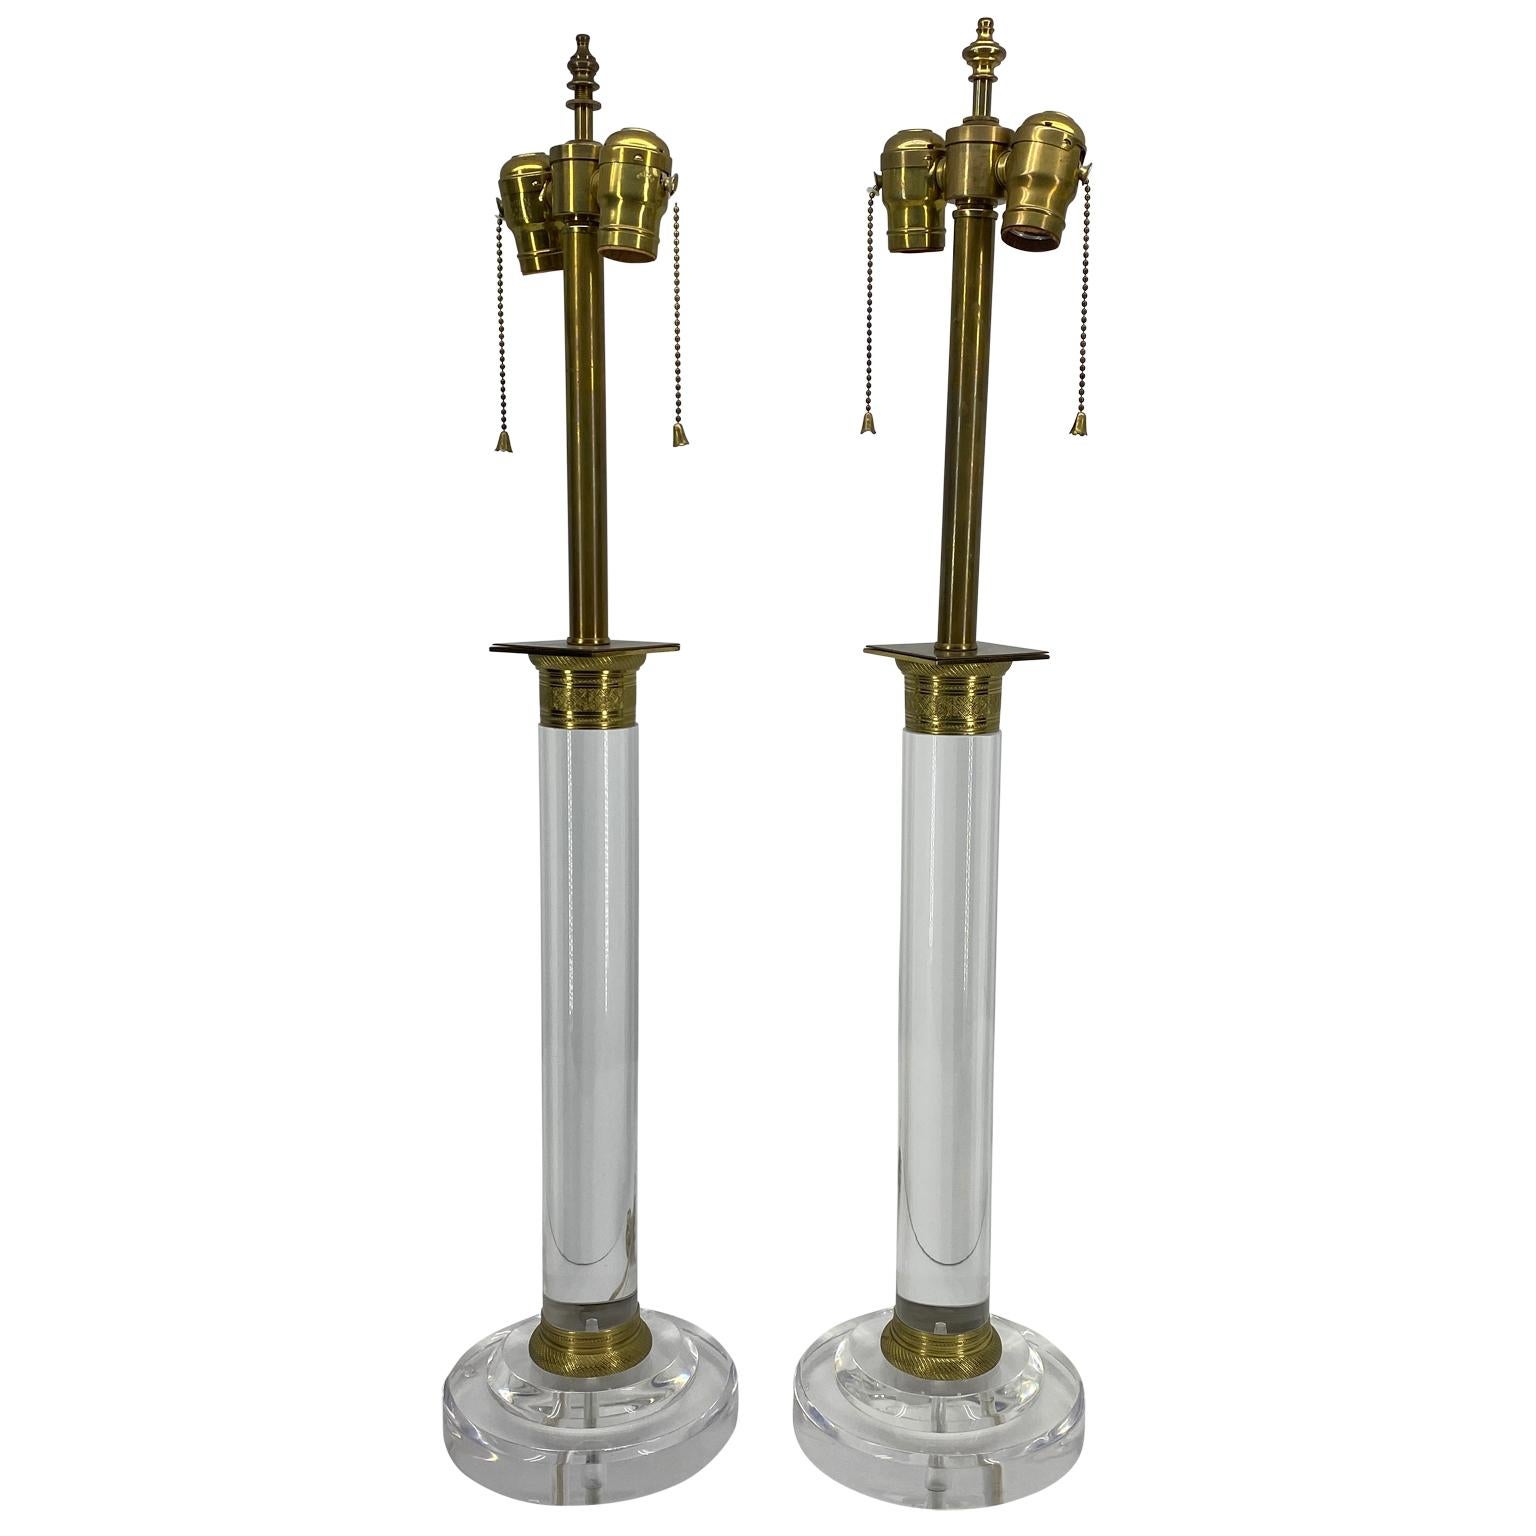 Thick Lucite and gilded bronze table lamps, 20th century, America.